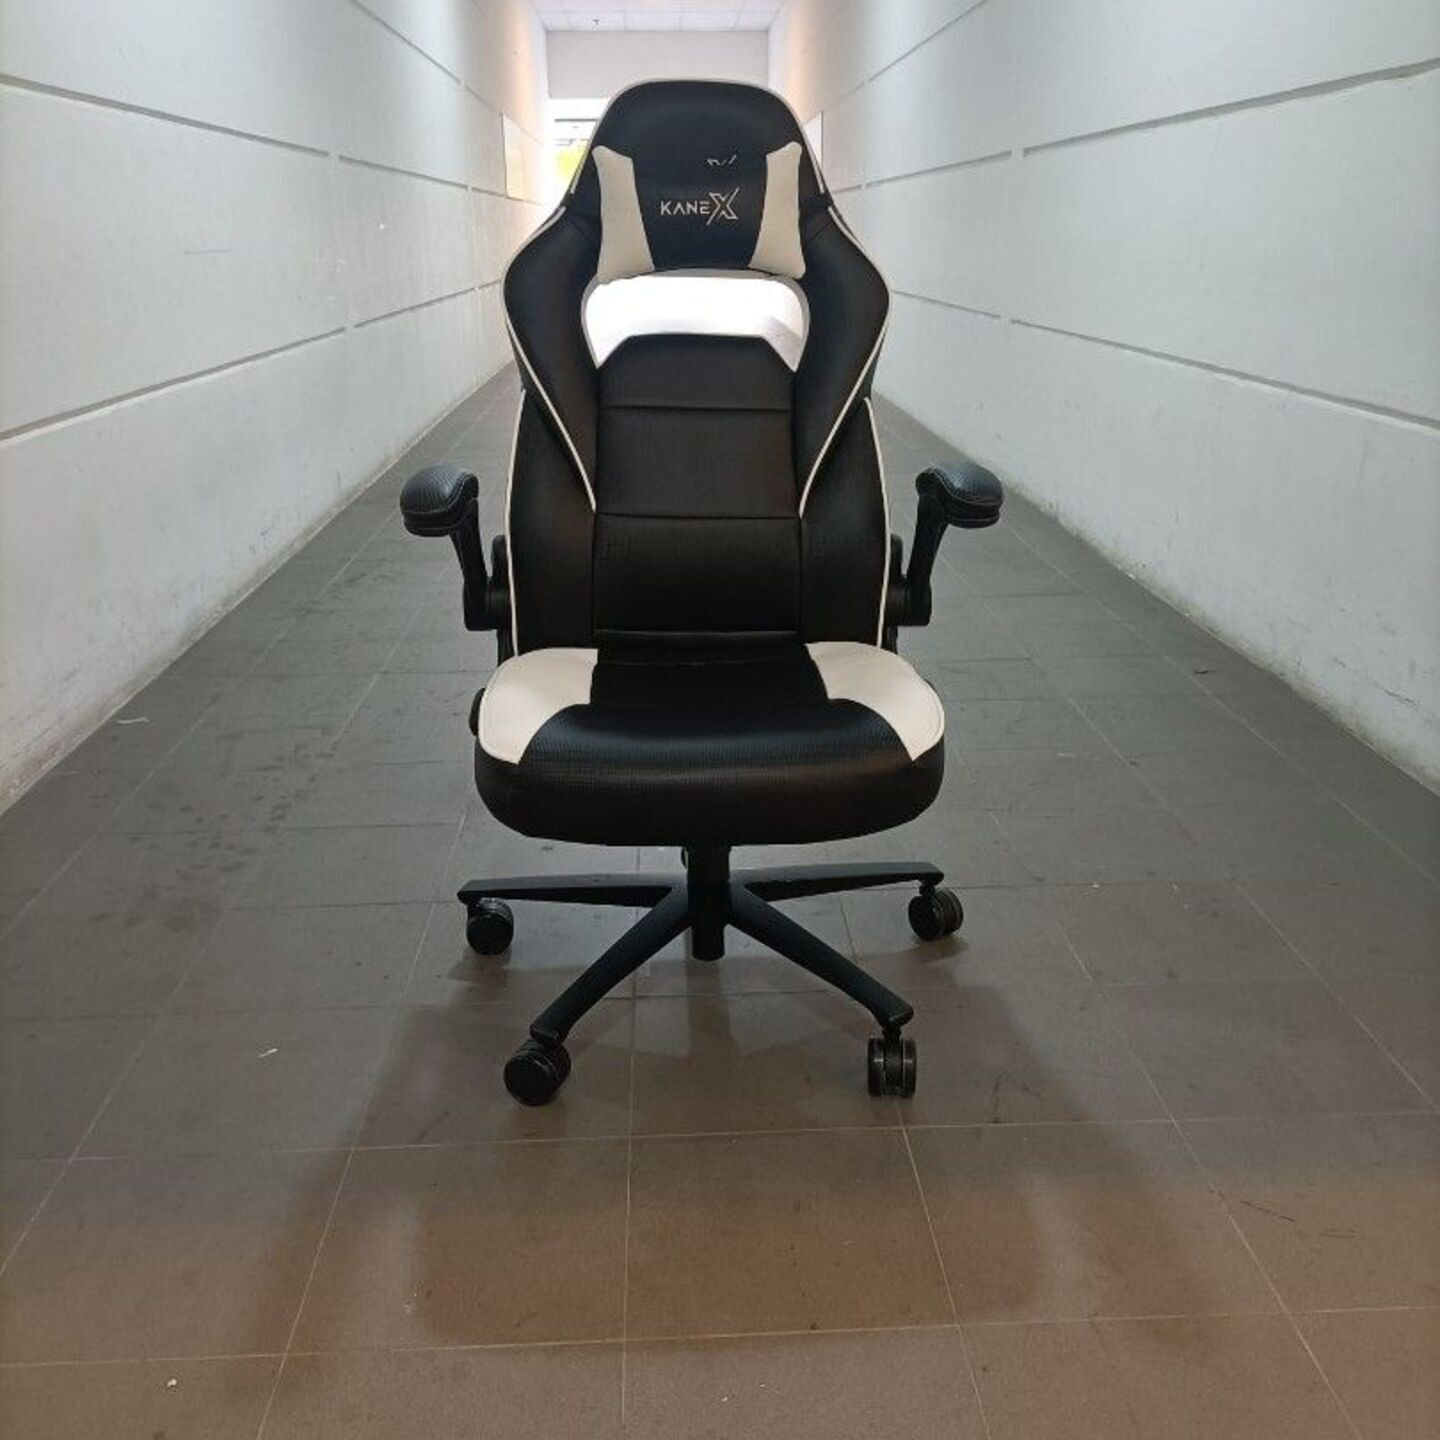 KANE X Argus Professional Gaming Chair in BLACK and WHITE